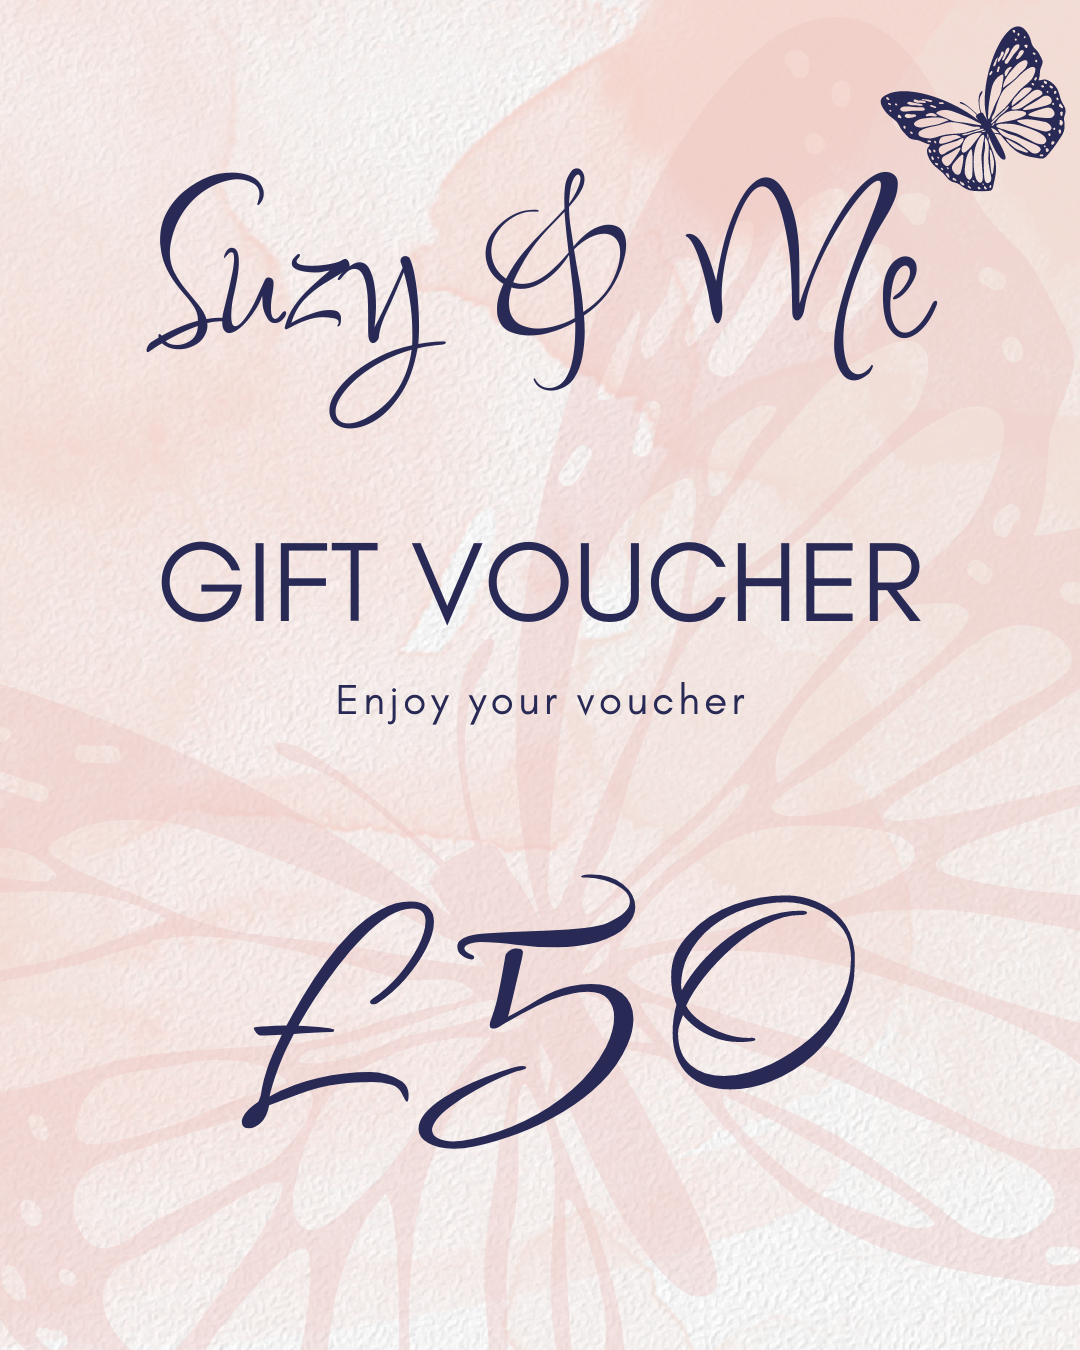 Suzy & Me Collection Gift Voucher £100